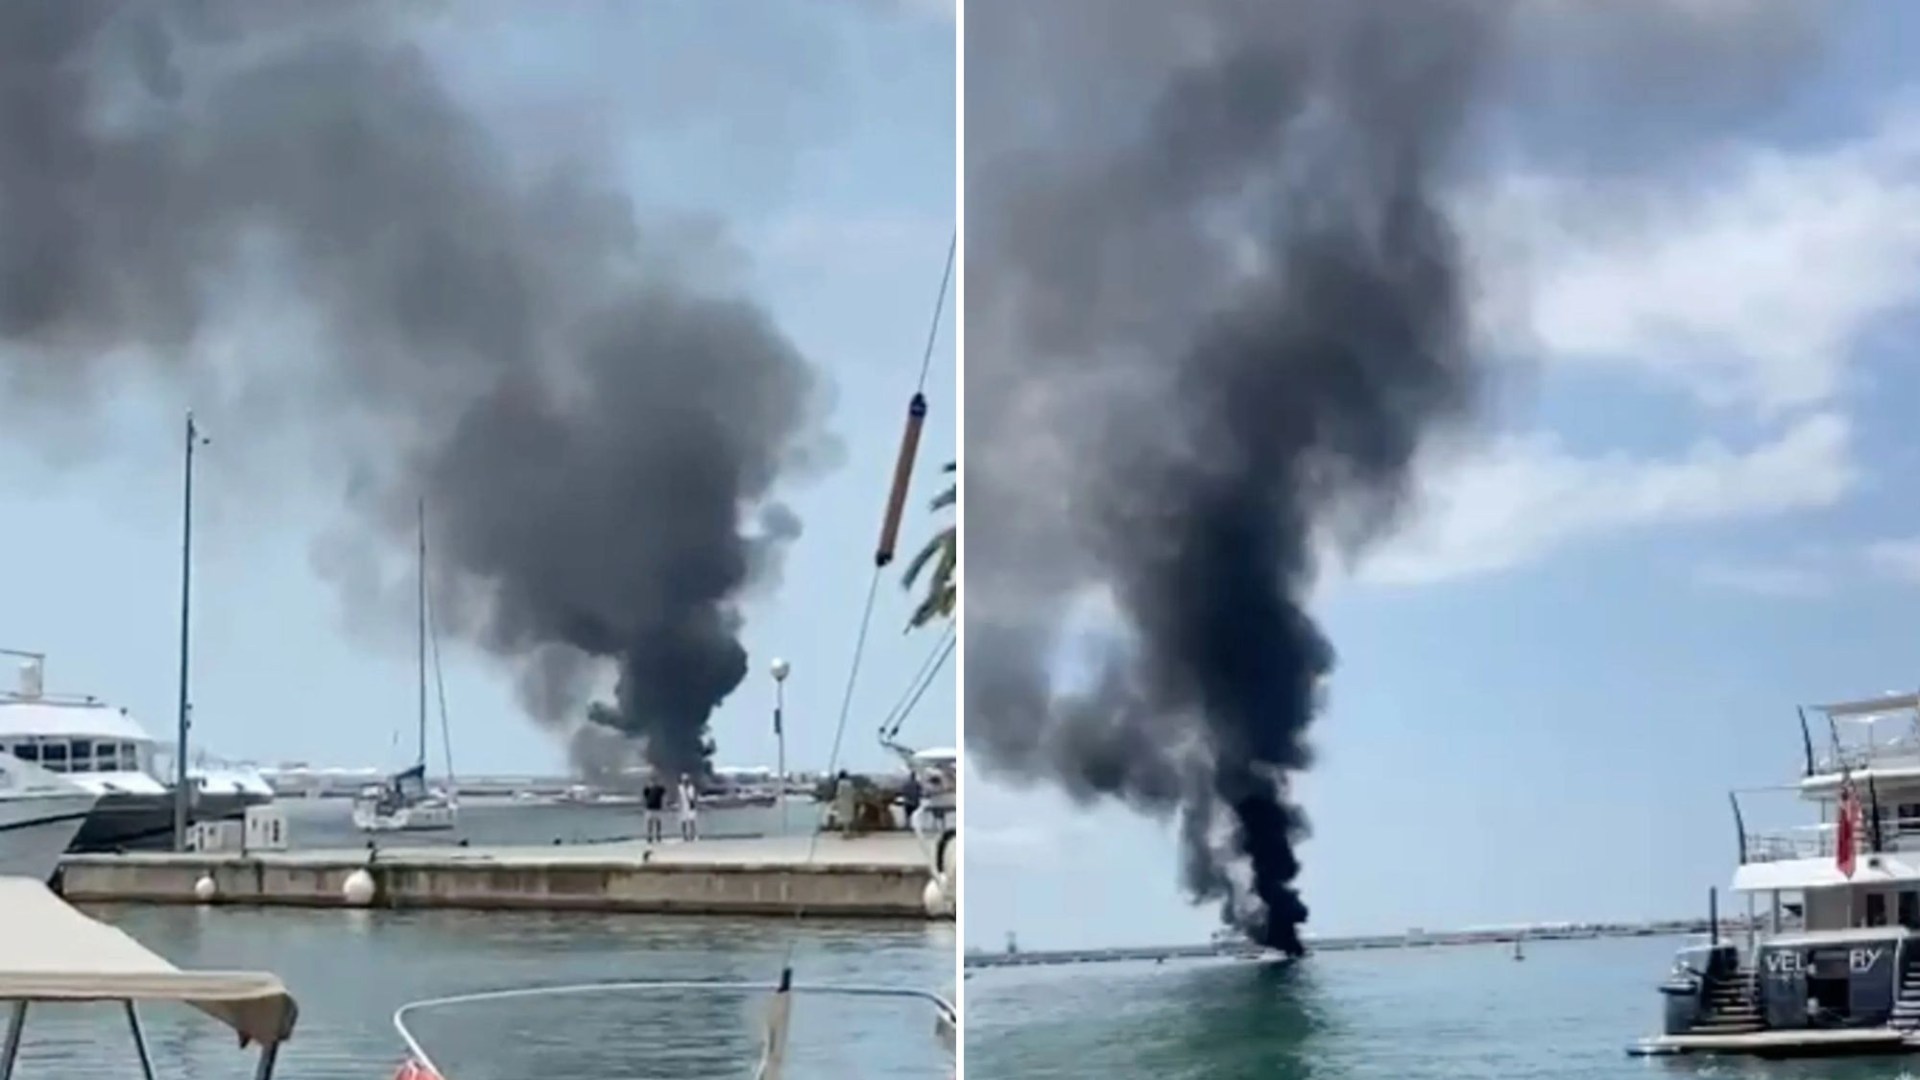 Brit couple, 33 & 40, suffer second-degree burns in horror boat explosion sparking inferno at Majorca port [Video]